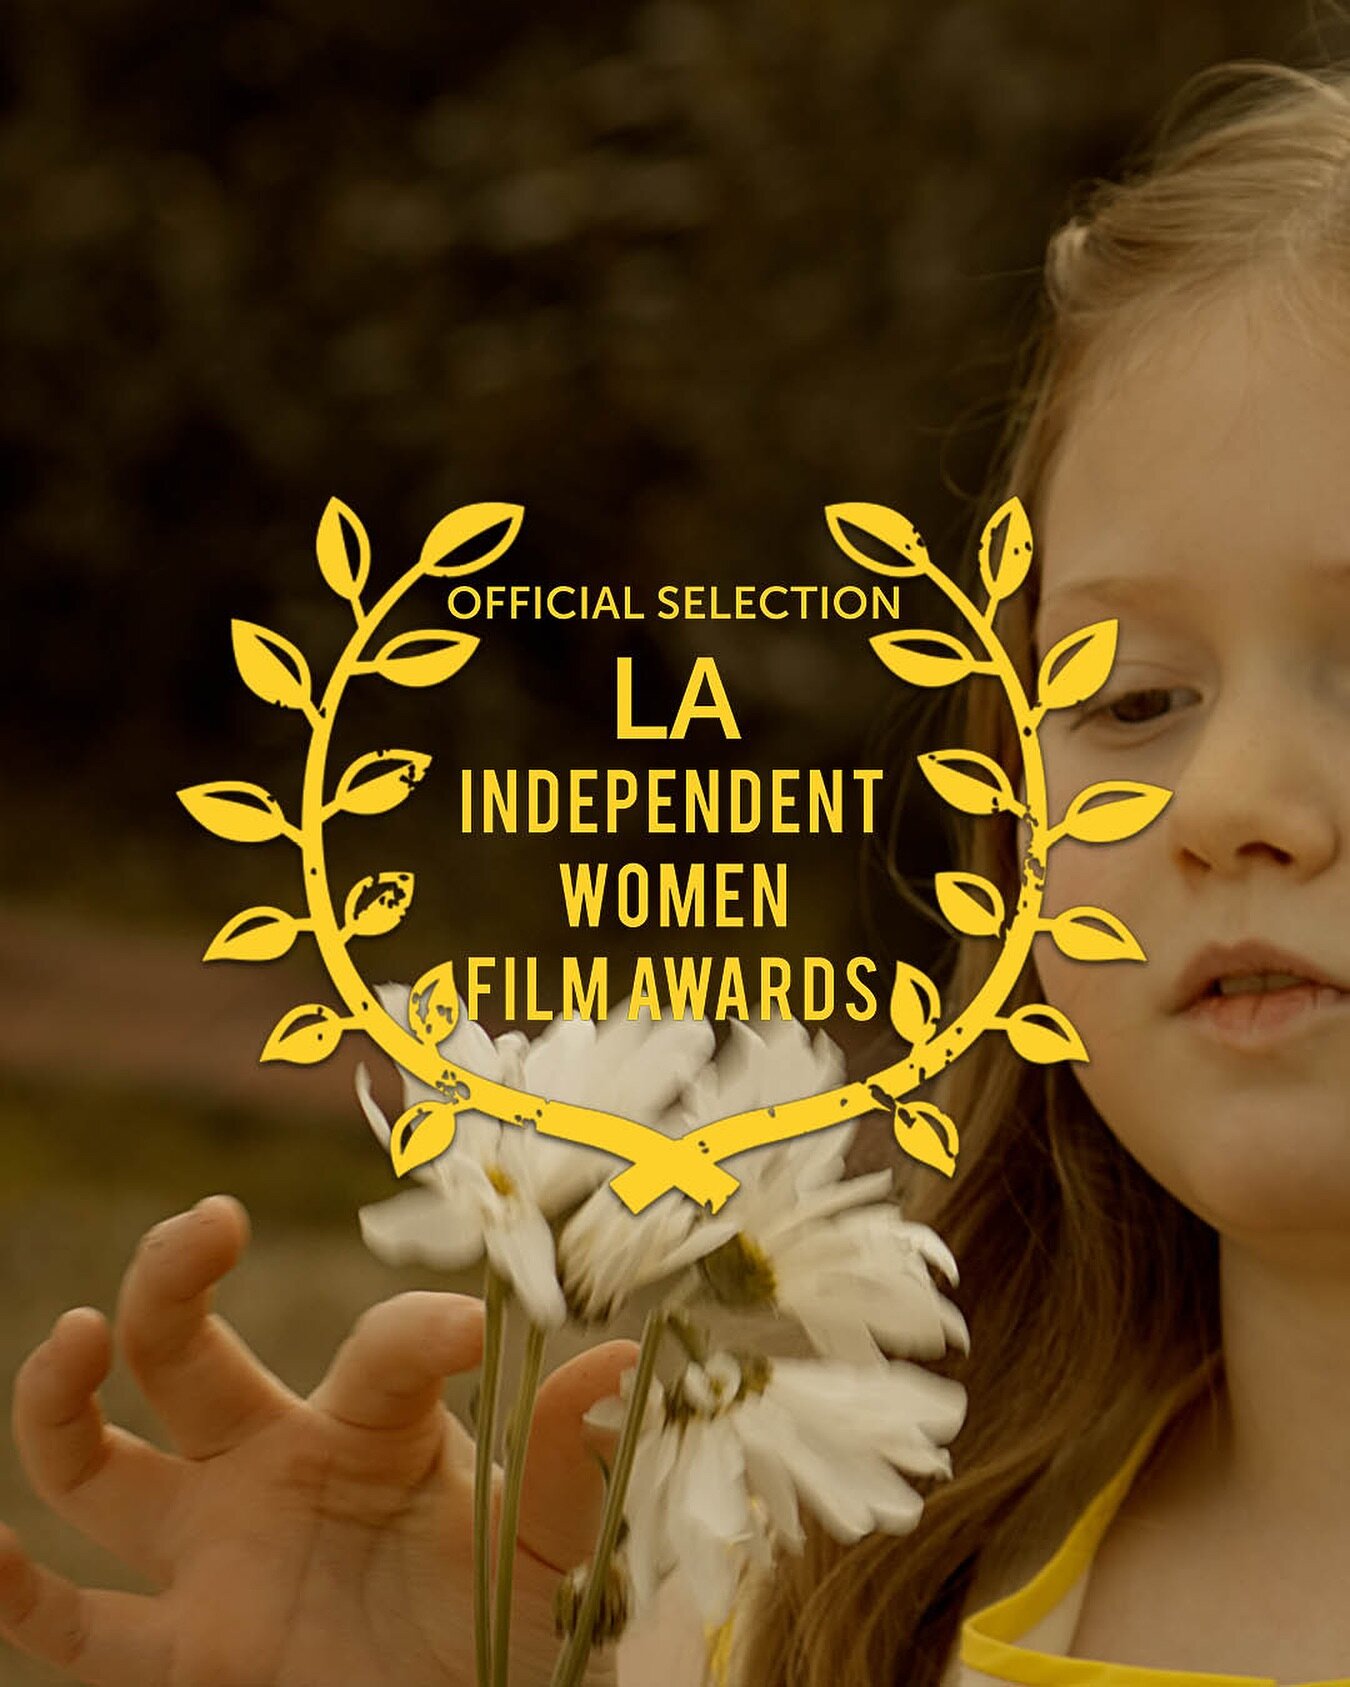 we&rsquo;re happy to announce that we are an official selection of the @laindependentwomenfilmawards. 

The LA Independent Women Film Awards showcases the best female talent in film and television around the world, and we&rsquo;re so proud that our p